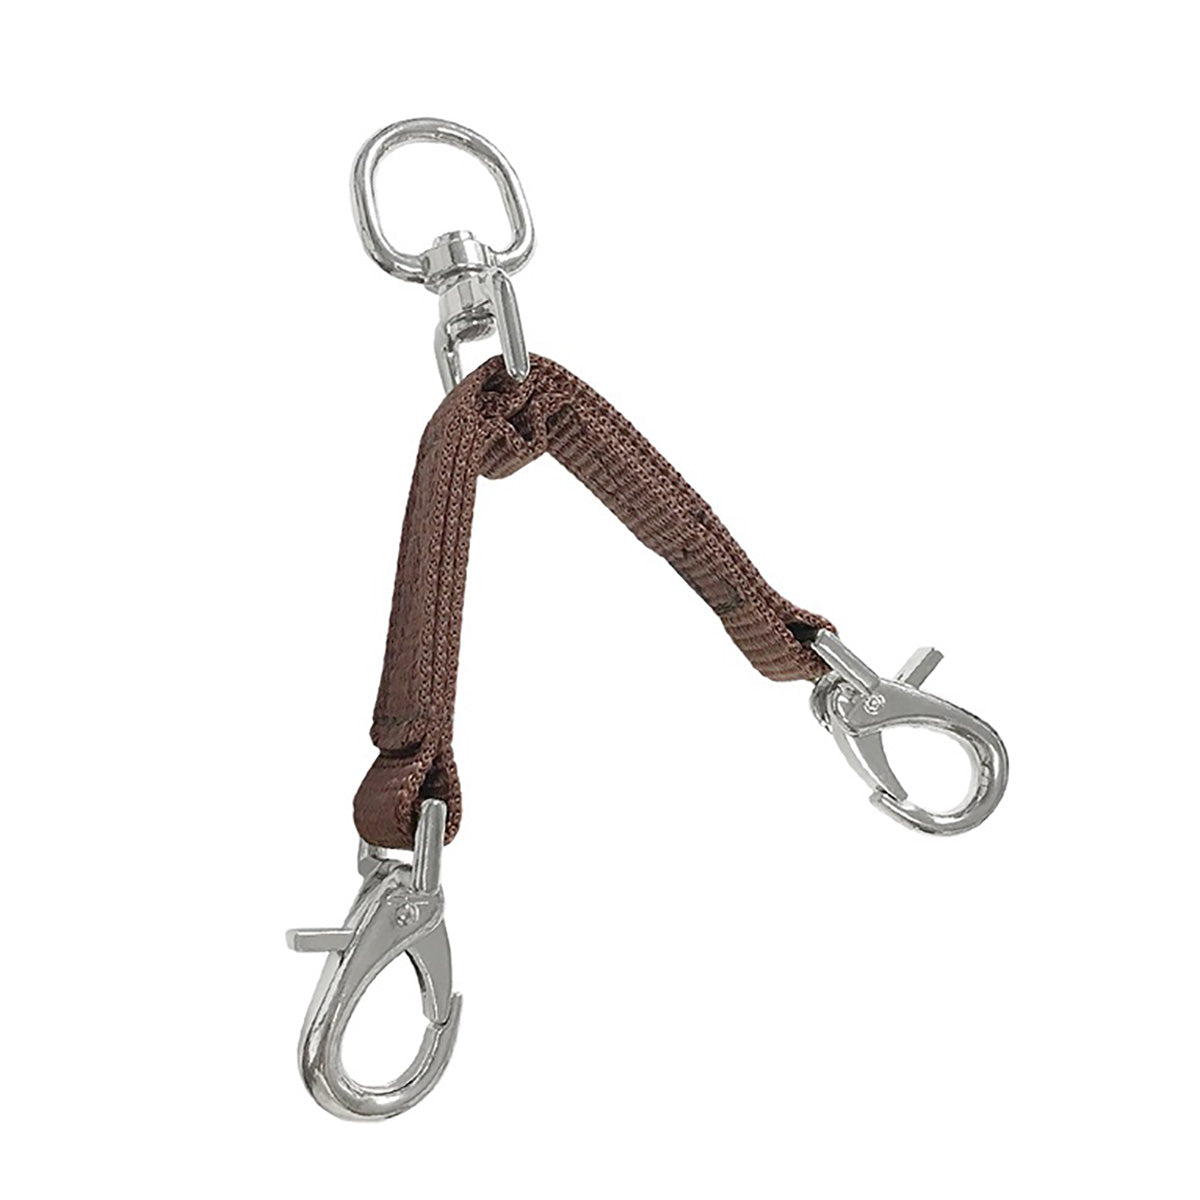 Lunge Strap Attachment with Swivel